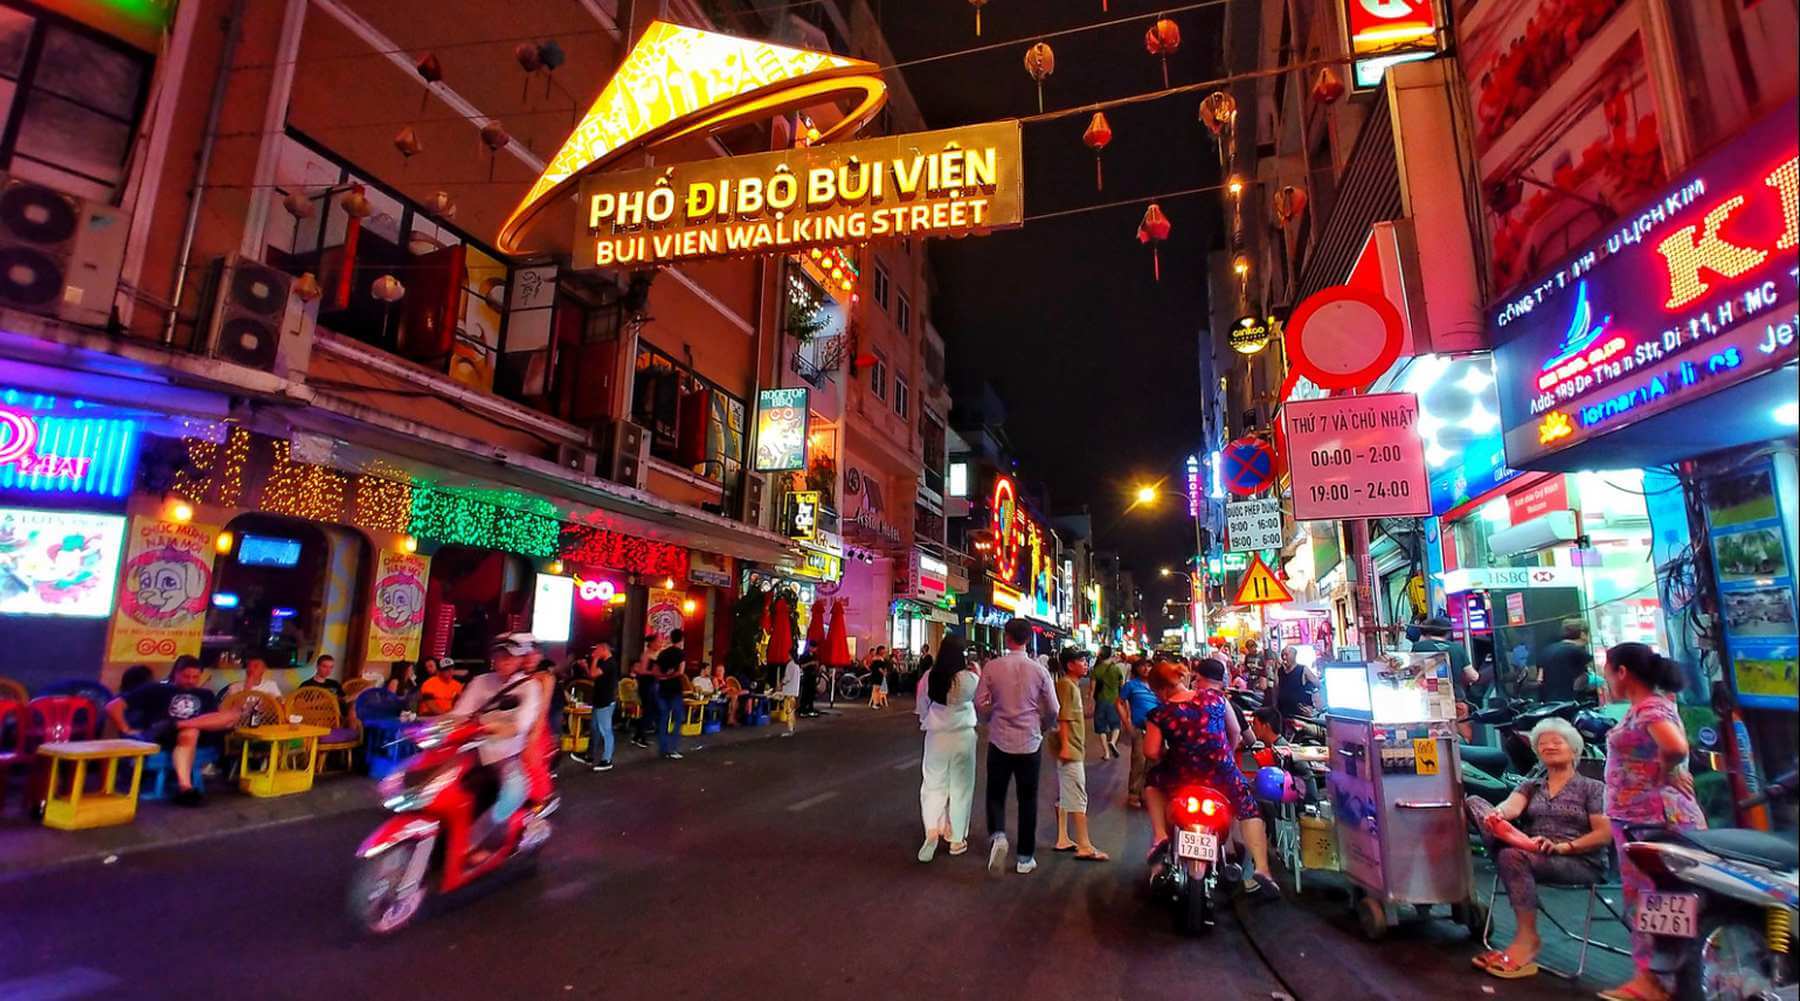 Look no further than the amazing Bui Vien Walking Street – where the culture, food, and fun come alive - Ho Chi Minh City Nightlife